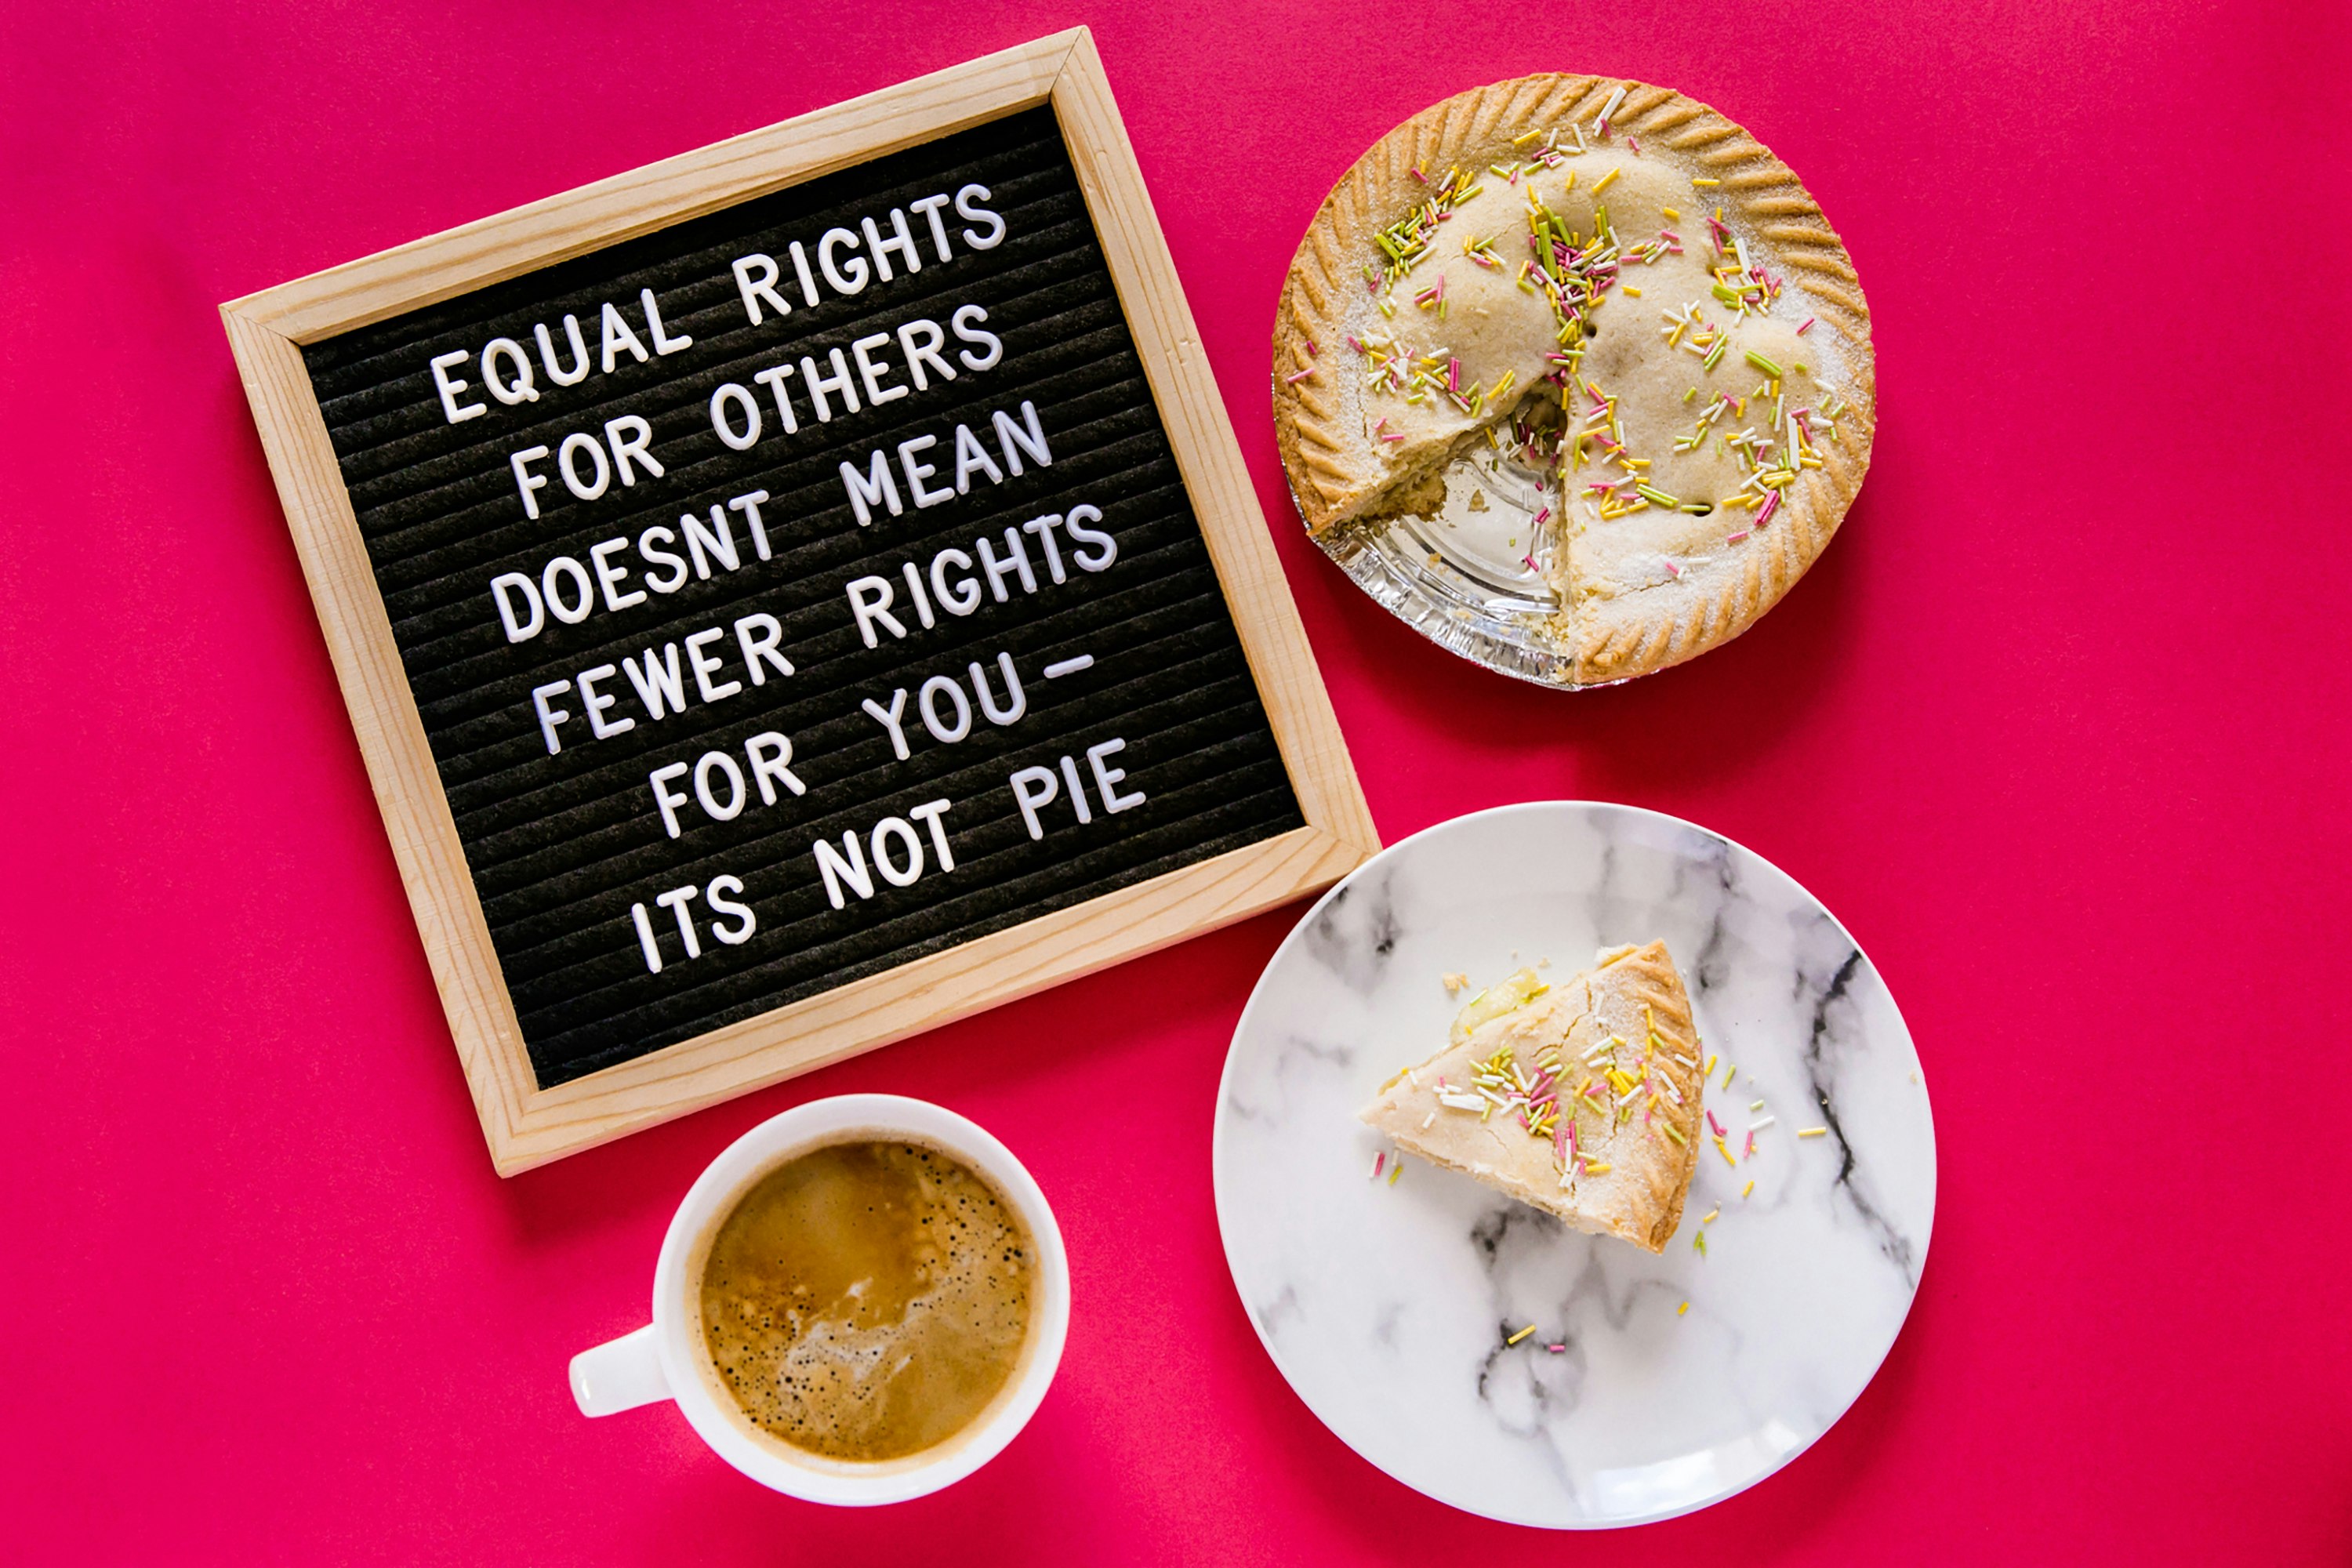 International Women's Day 2021 - Equal rights for others does not mean fewer rights for you, it's not pie. An image from our 2021 Styled Stock collection.

Image is a flat lay from above on a hot pink background. There's a pegboard in the top left showing "Equal rights for others does not mean fewer rights for you - it's not pie" in all caps. The pegboard has a wooden frame and black background with white pegs. In the top right is pie with a slice missing and sprinkles on top. In the bottom right is the slice of pie on a marbled plate. In the bottom left is a white mug filled with coffee.